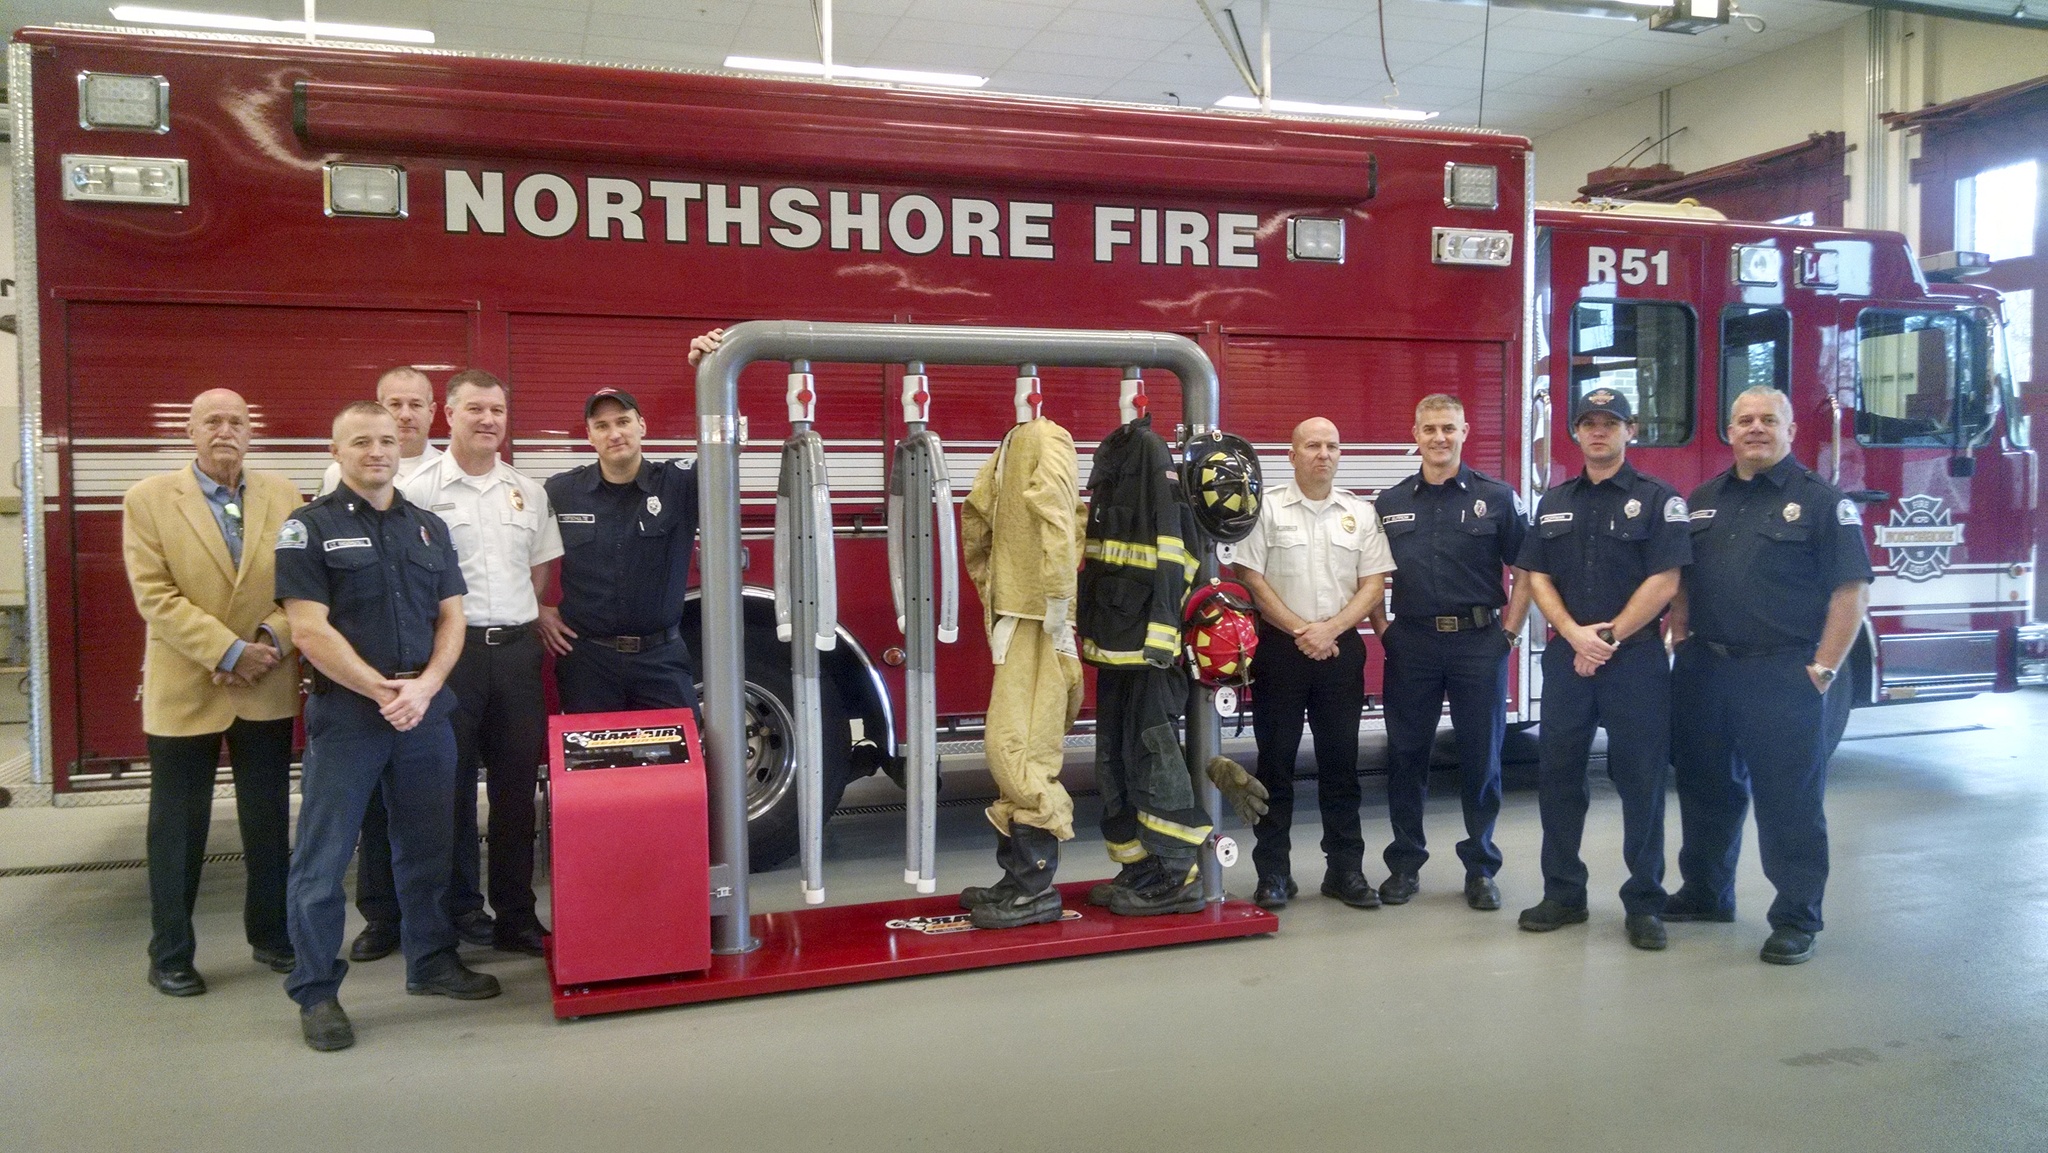 Ram Air Gear Dryer Director of Sales David Adams (left) presents a dryer, won in his company’s Hometown Heroes contest, to Northshore Fire Department staff in Kenmore. CATHERINE KRUMMEY/Kenmore Reporter